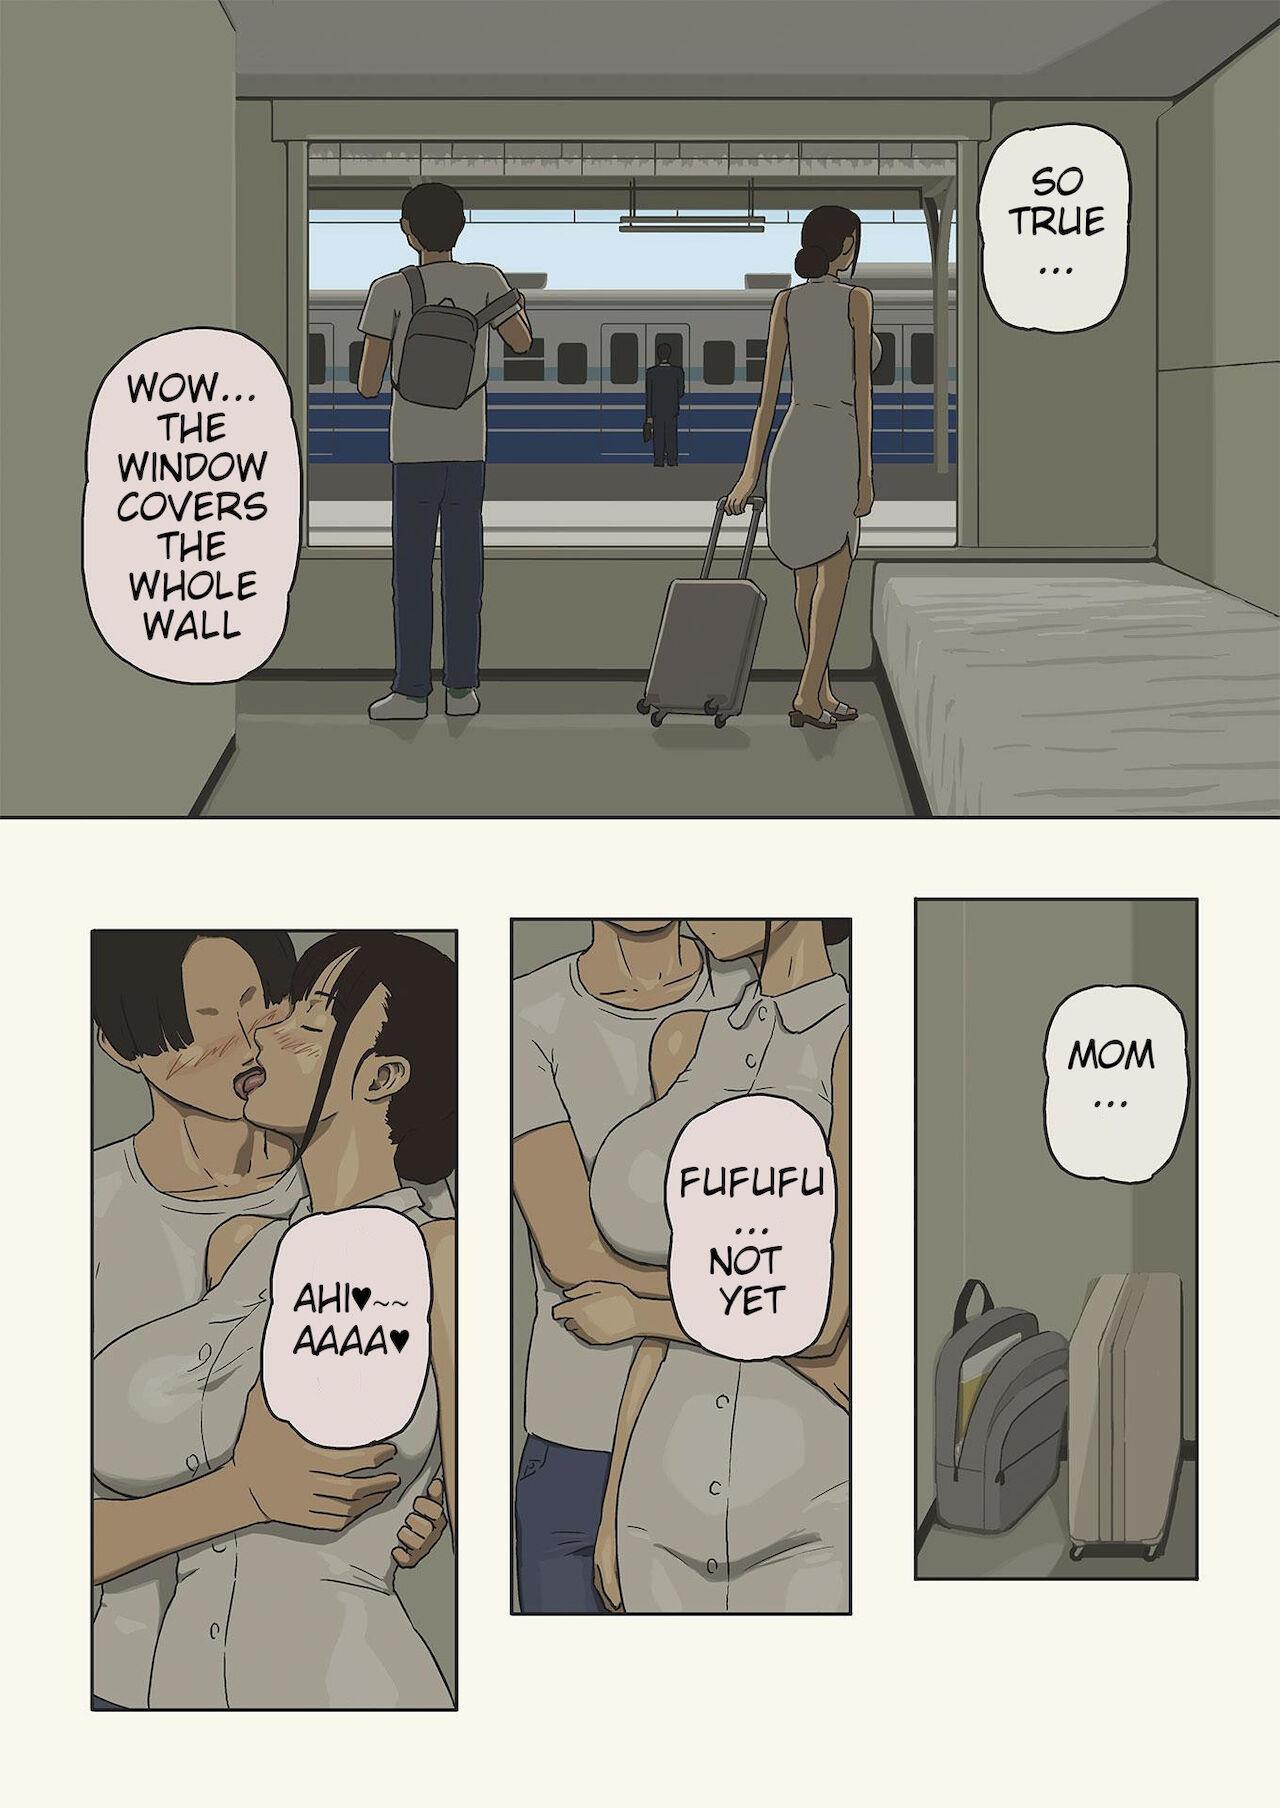 Animation Share 4 - A Parent and Child in the Window of a Train Car Seeking Love and Sex - Original Korean - Page 6